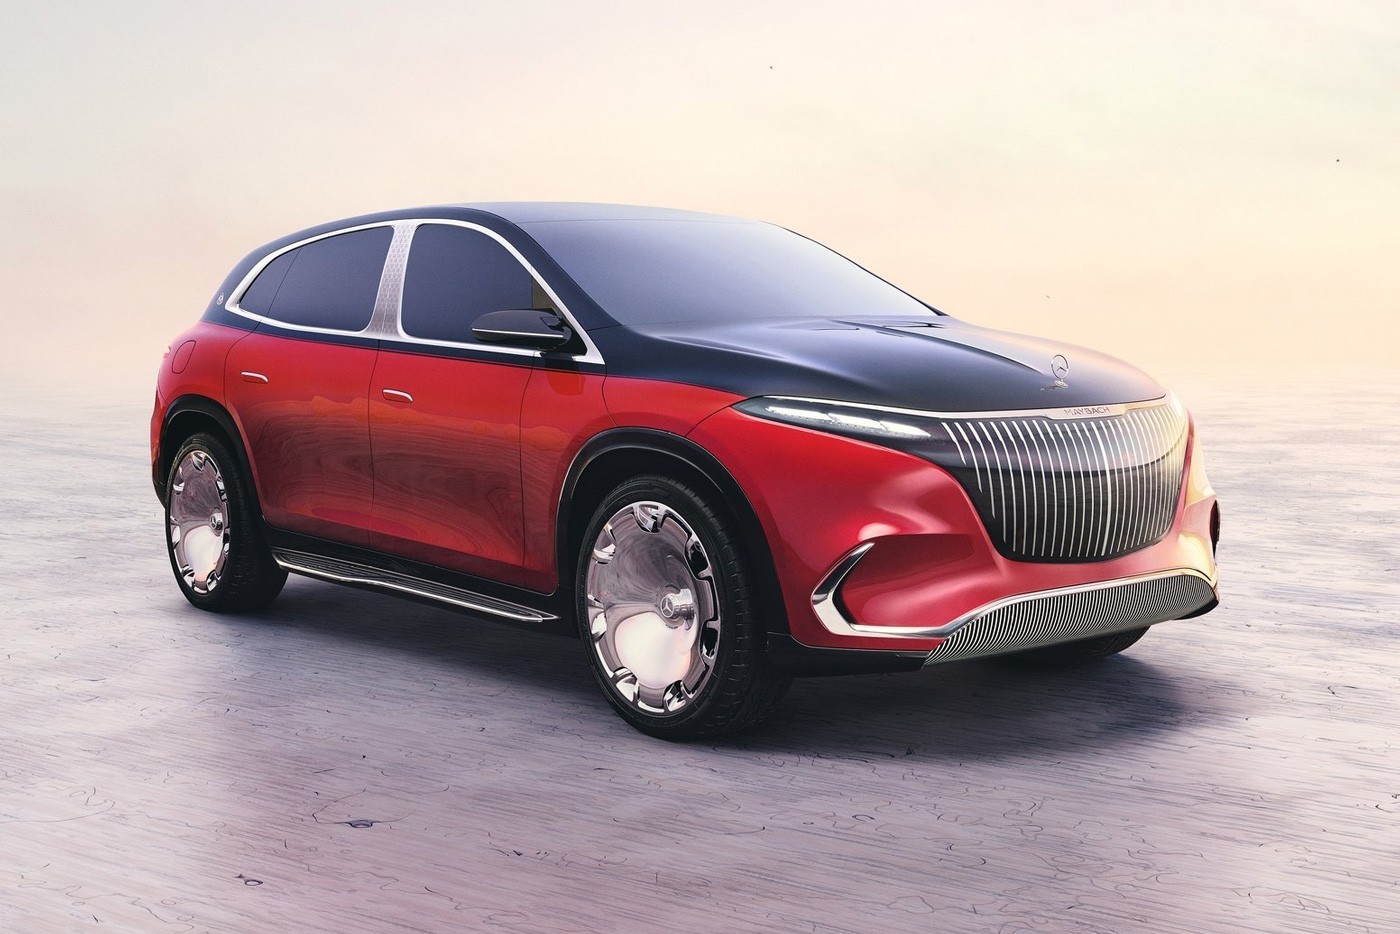 This will be the first electric Maybach